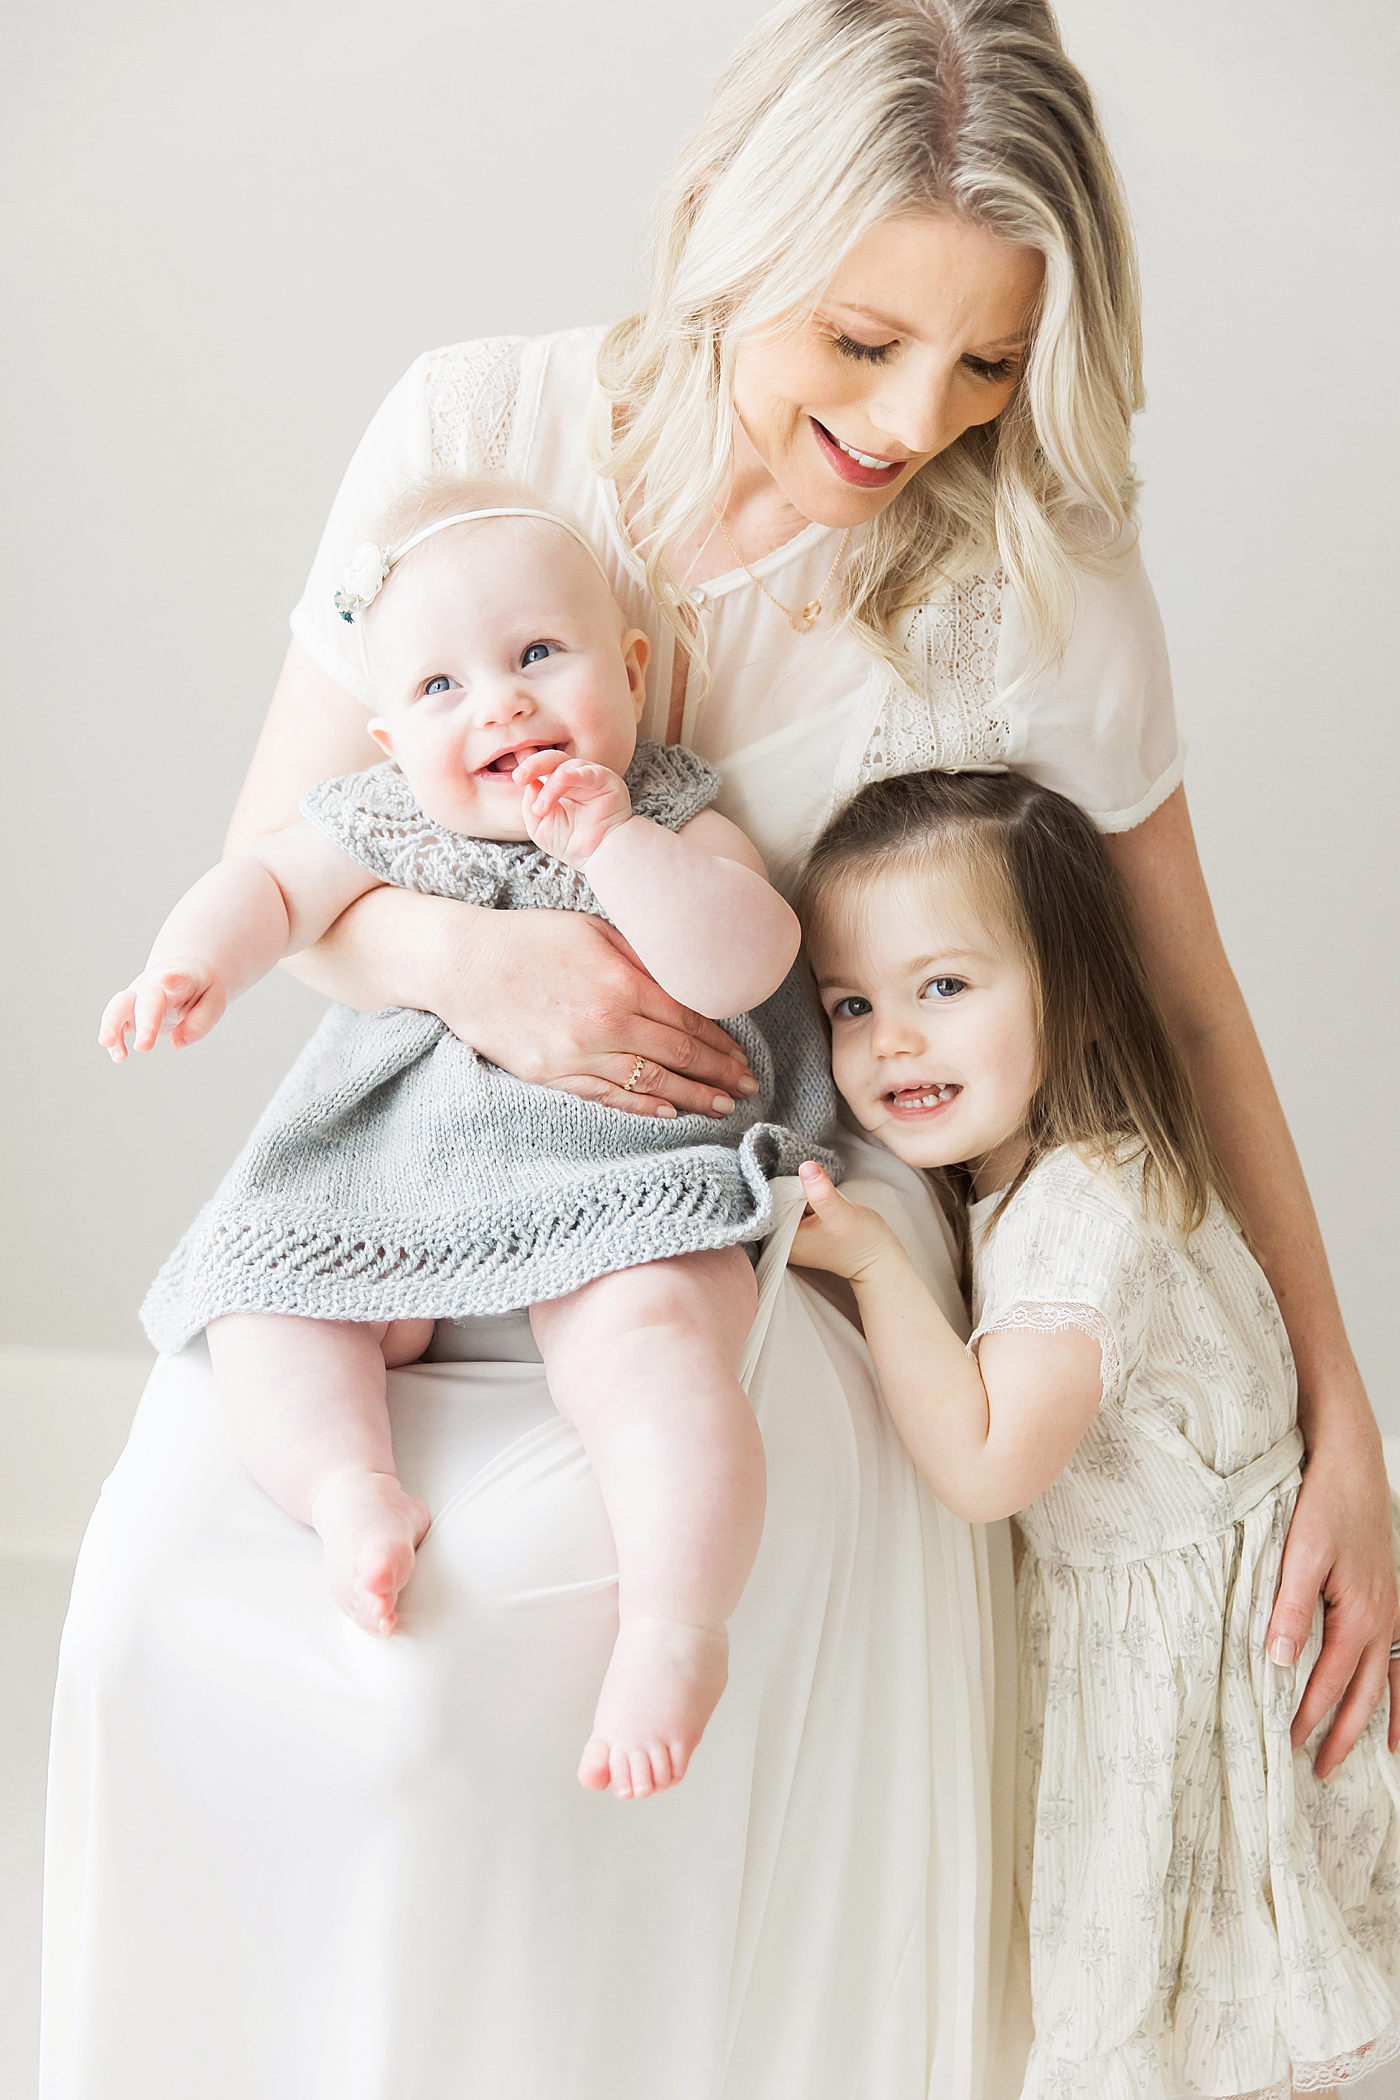 Portrait of a mom and her two daughters. Photos by Fresh Light Photography.